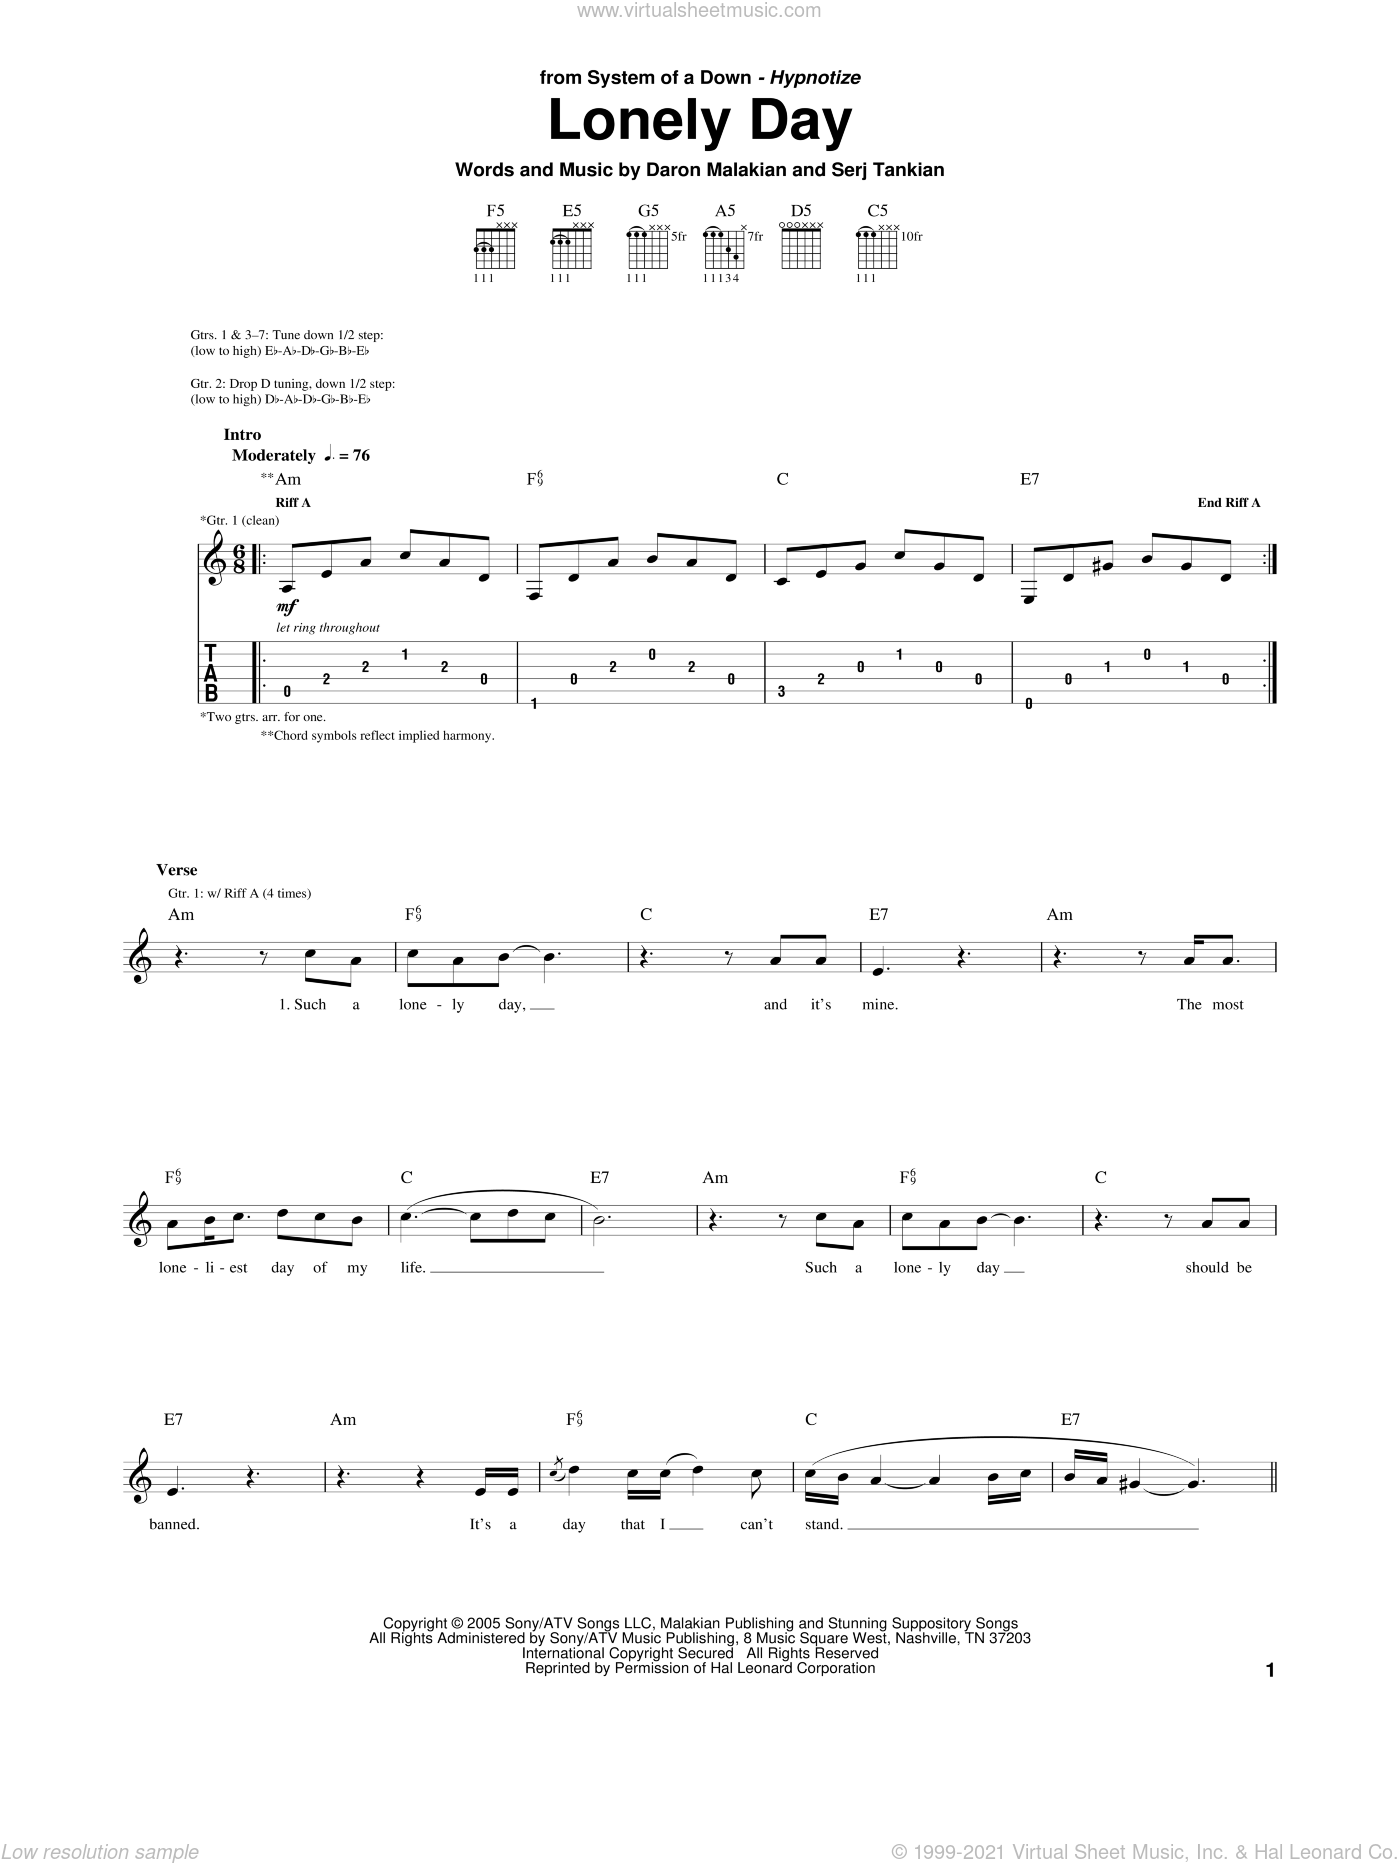 Down - Lonely Day sheet music for 